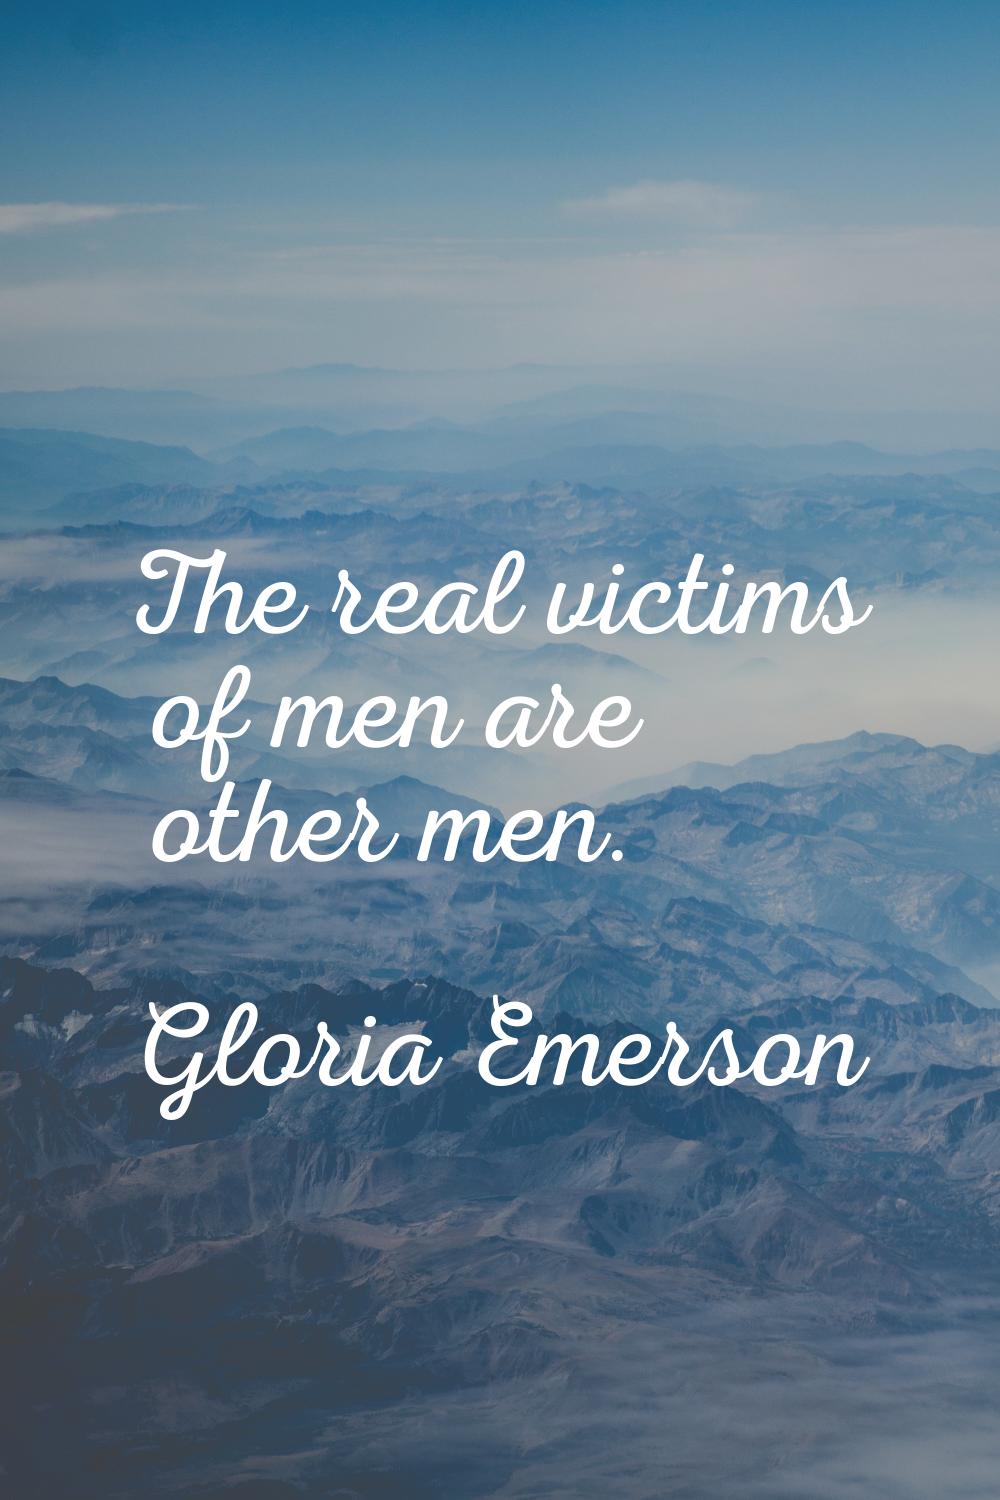 The real victims of men are other men.